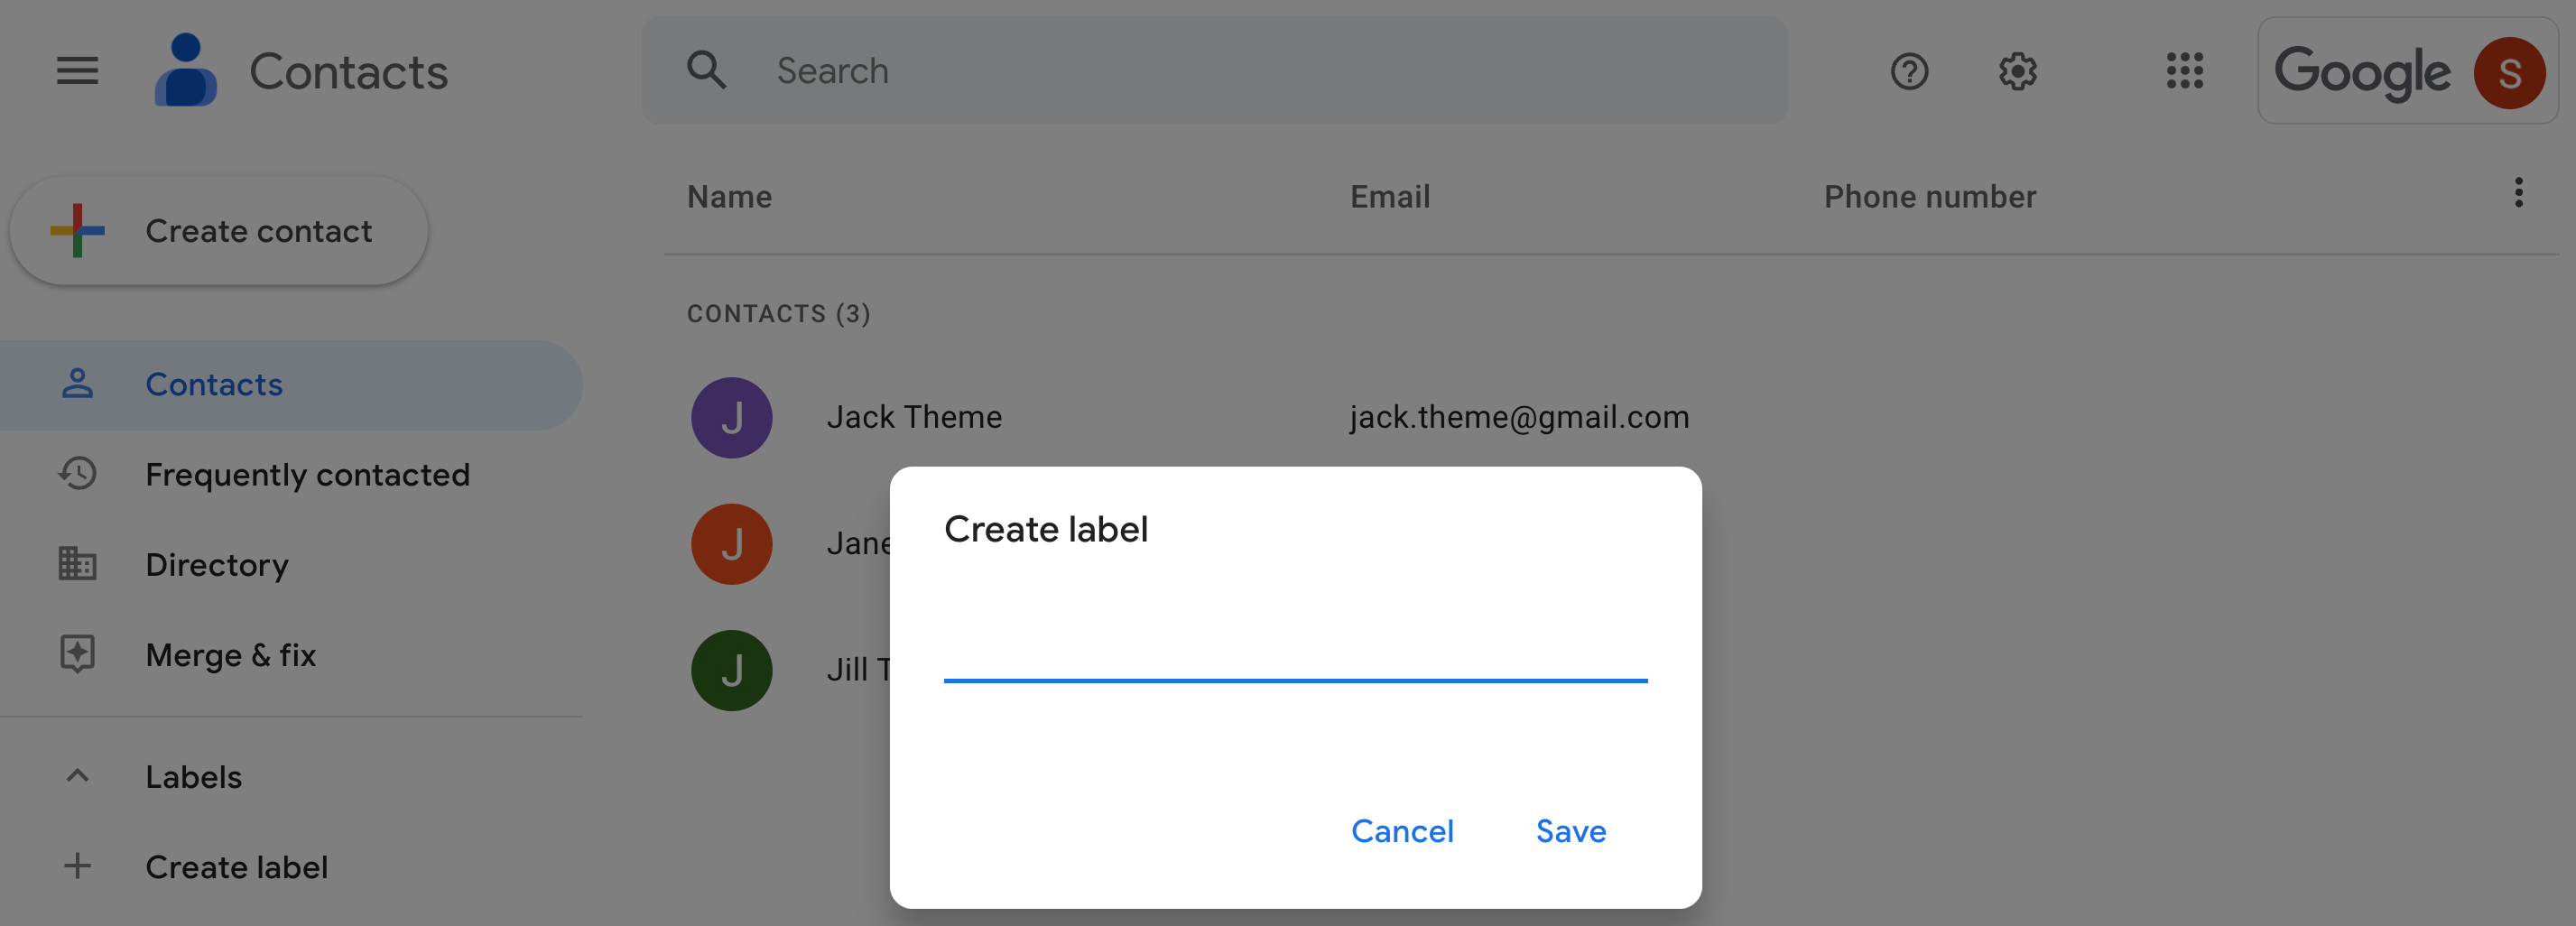 Create label in Google Contacts.